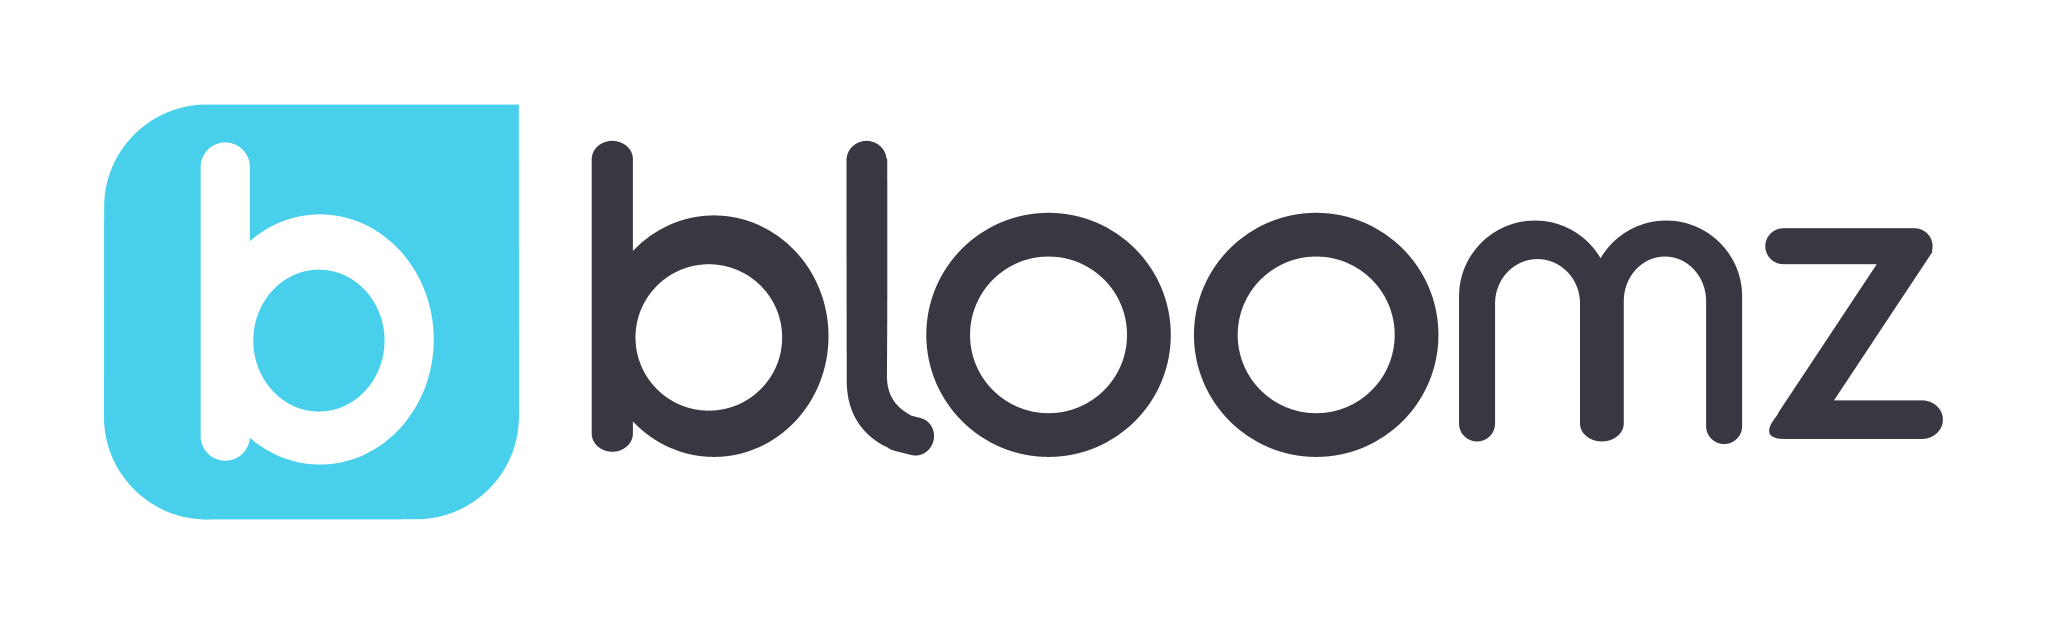 Bloomz will waive school fees to LWSD